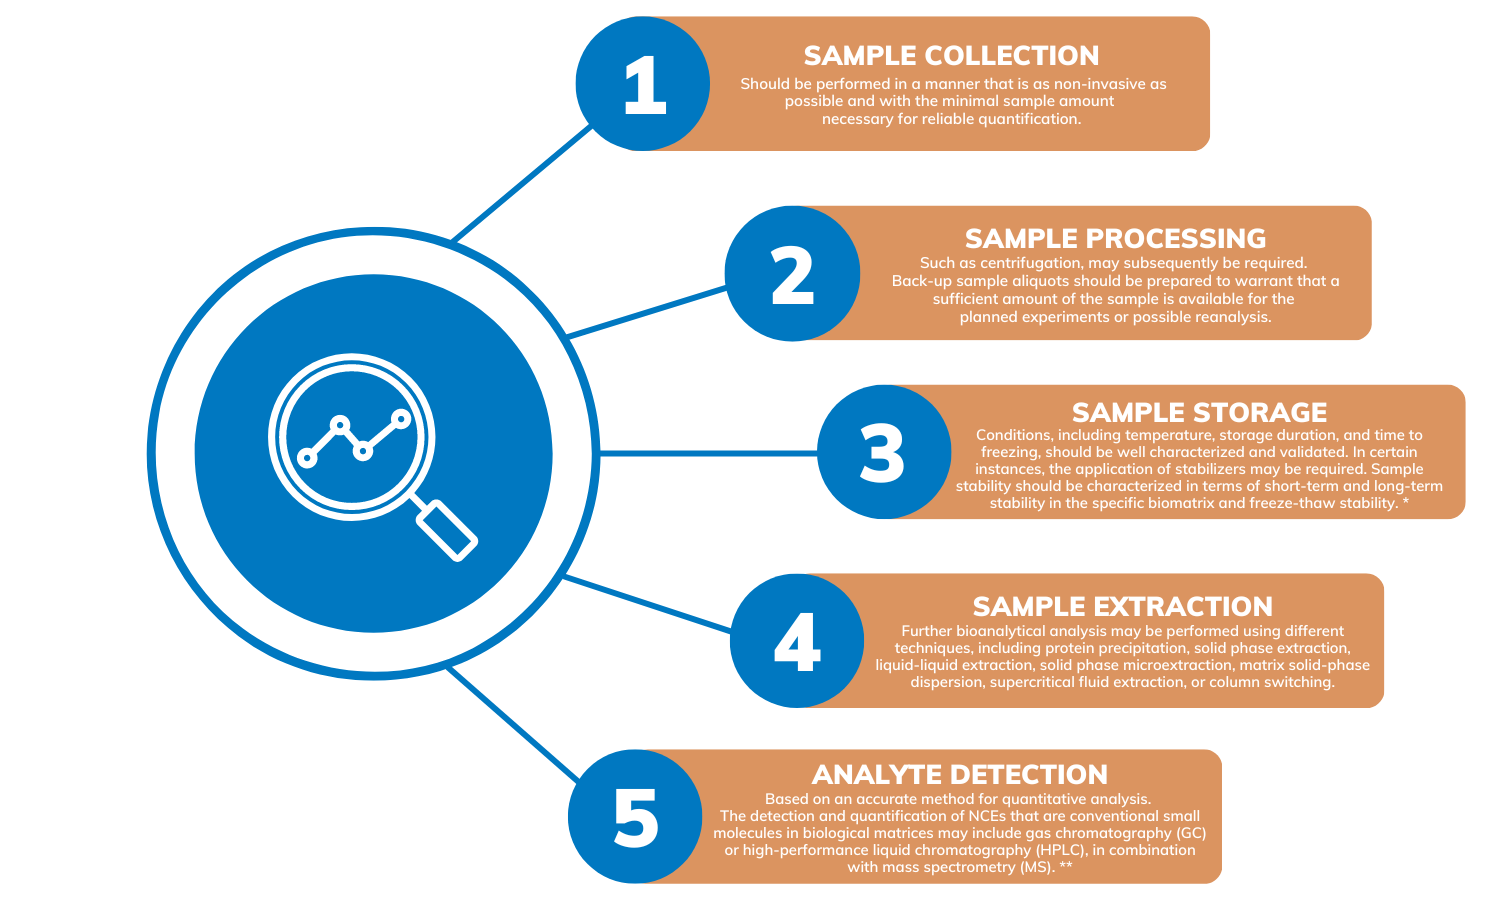 Steps Involved in Bioanalytical Analysis